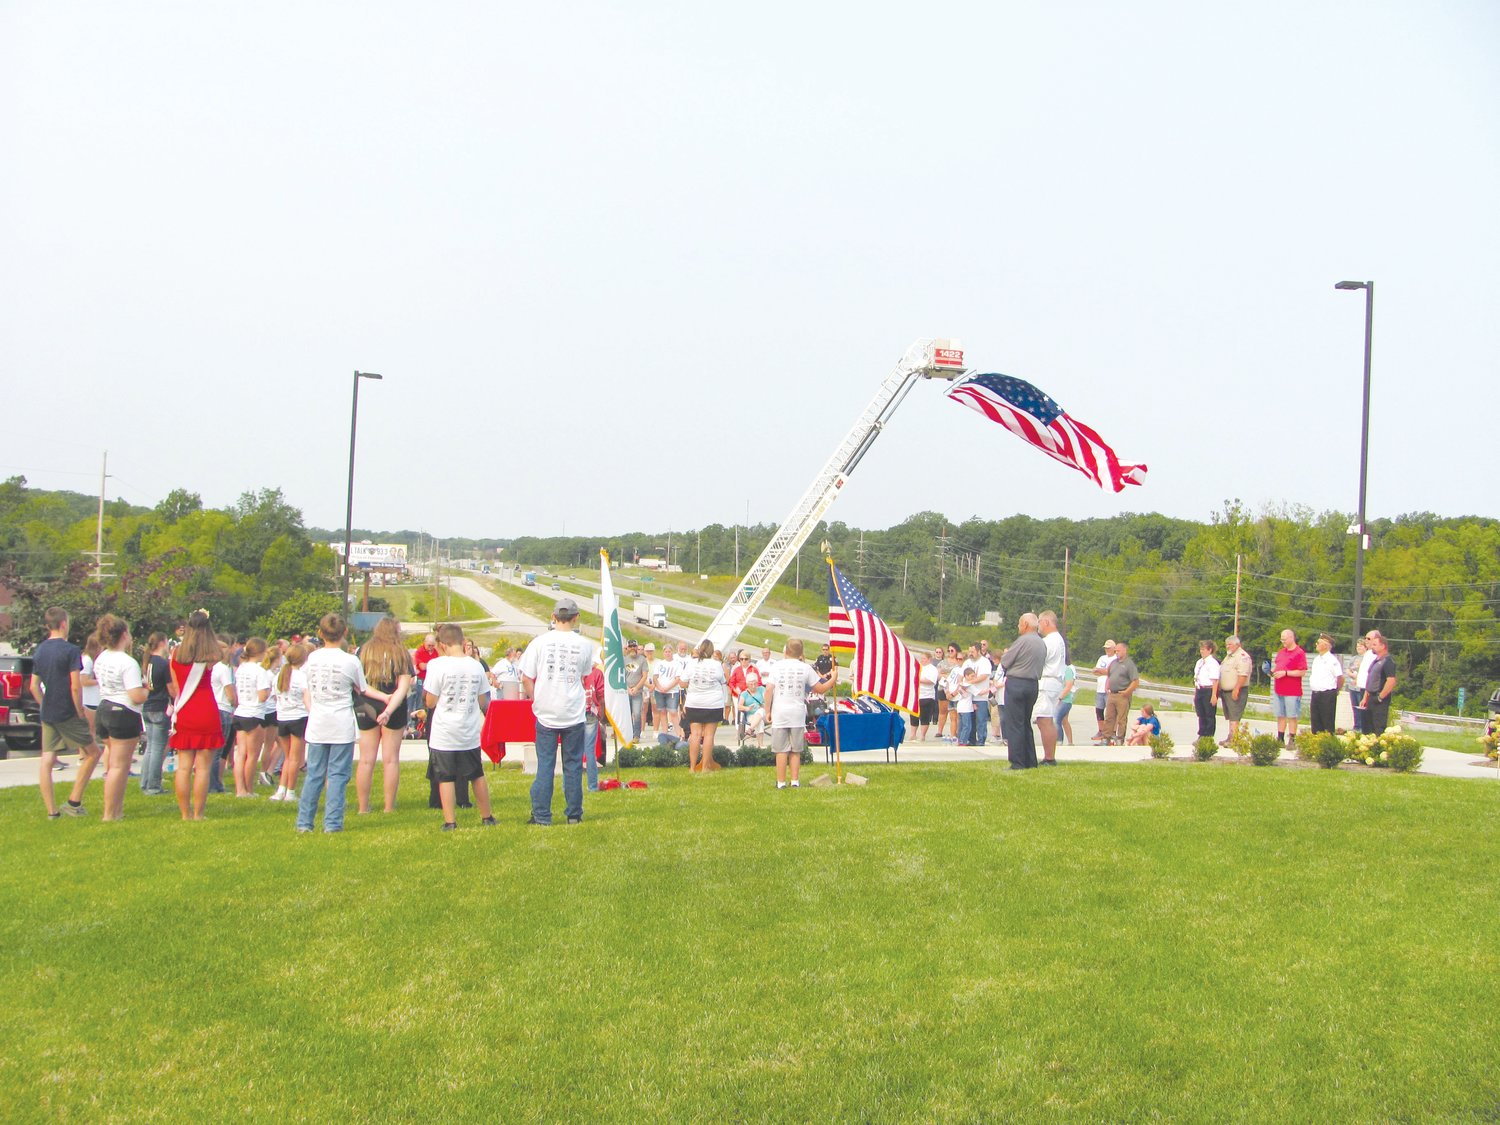 NEVER FORGET — Community organizations and residents attended a 9/11 ceremony on Saturday, Sept. 11, to mark the 20th anniversity of the terrorist attacks. The Prairie View 4-H Club and Warren County 4-H Council partnered with the Tribute to Veterans Memorial Committee to organize and host the event.